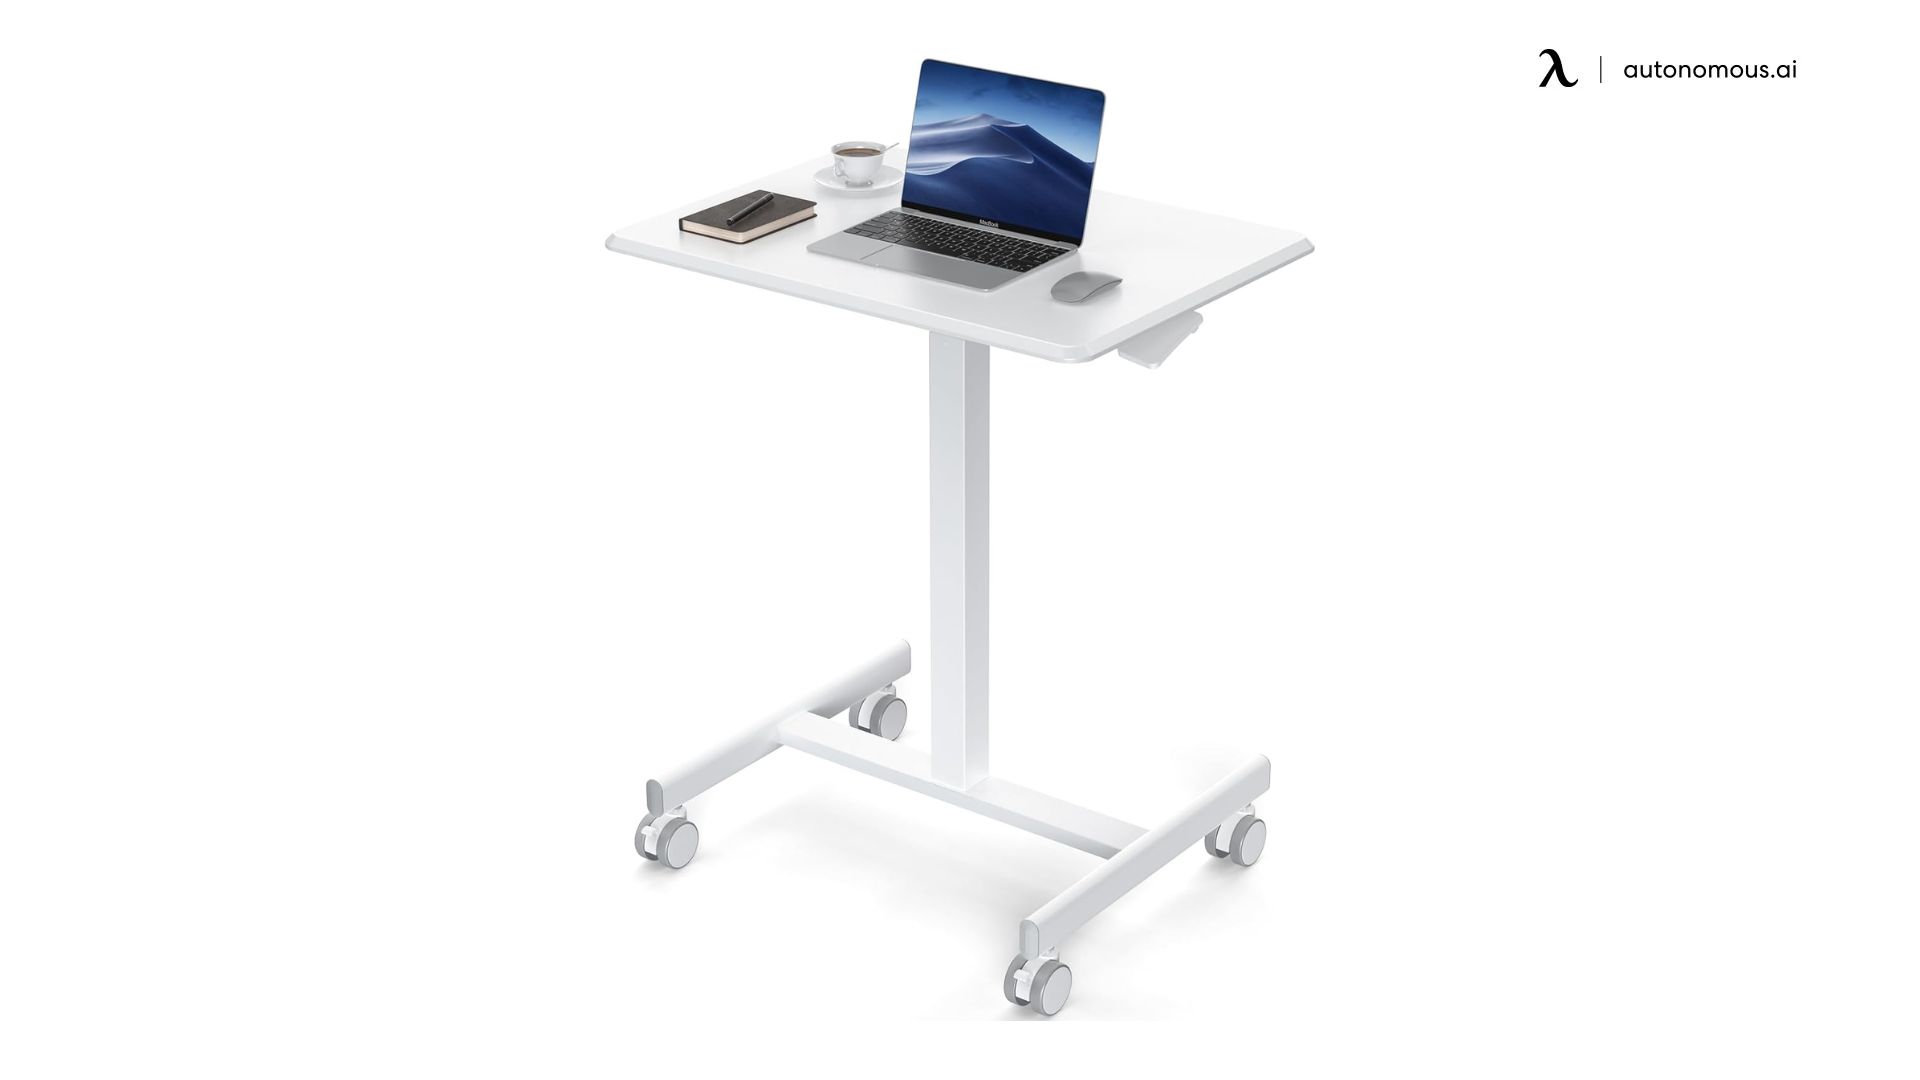 edx Small Mobile Rolling Standing Desk